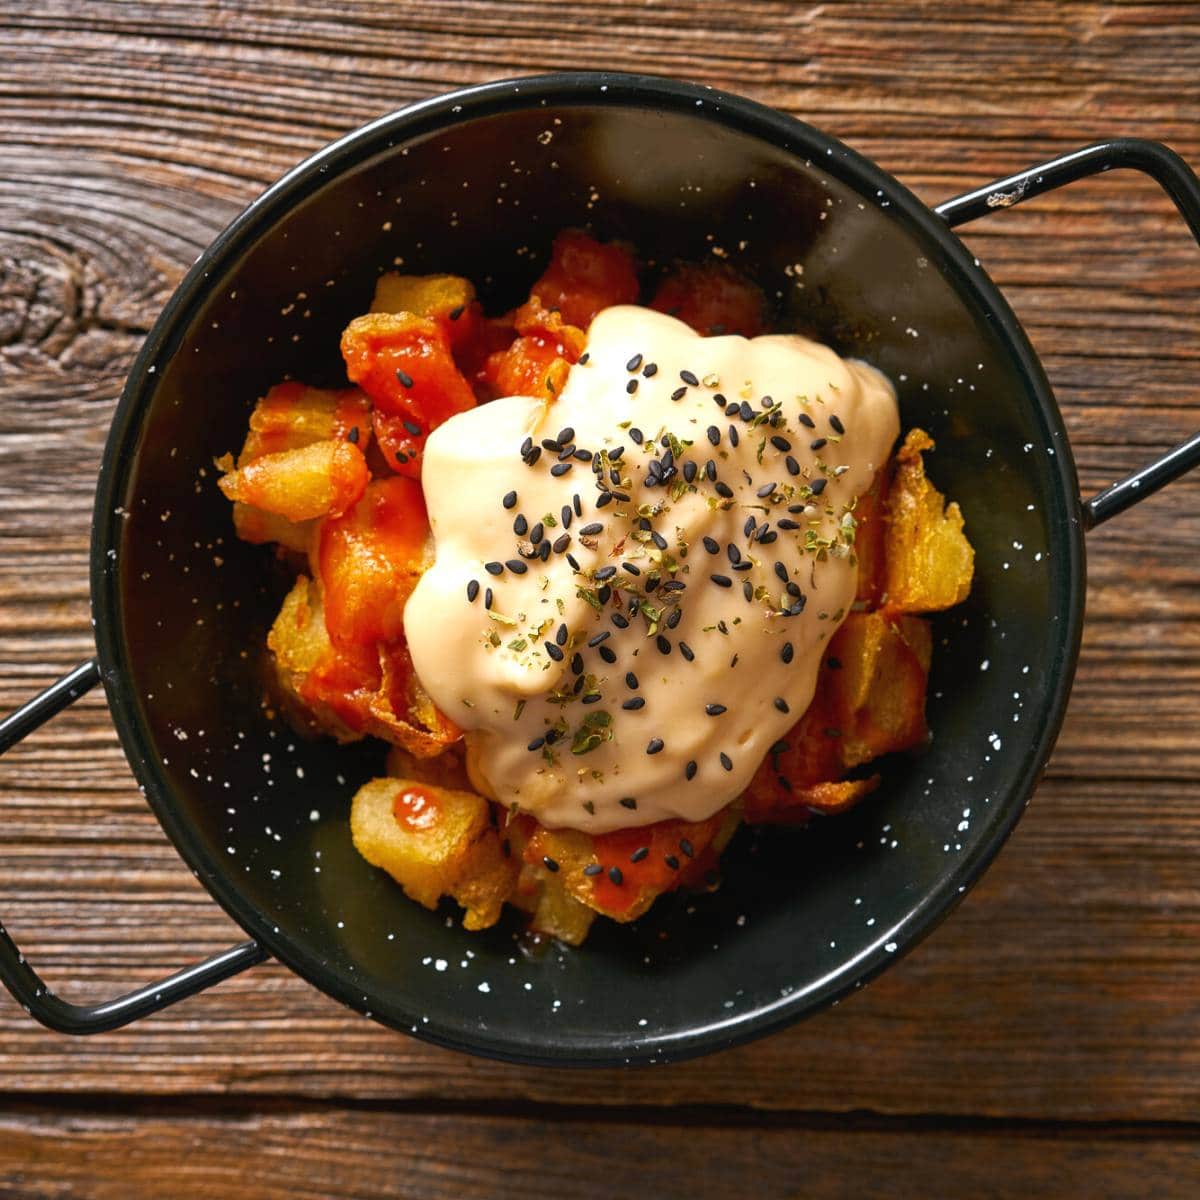 Patatas bravas in a black dish on a wooden table.